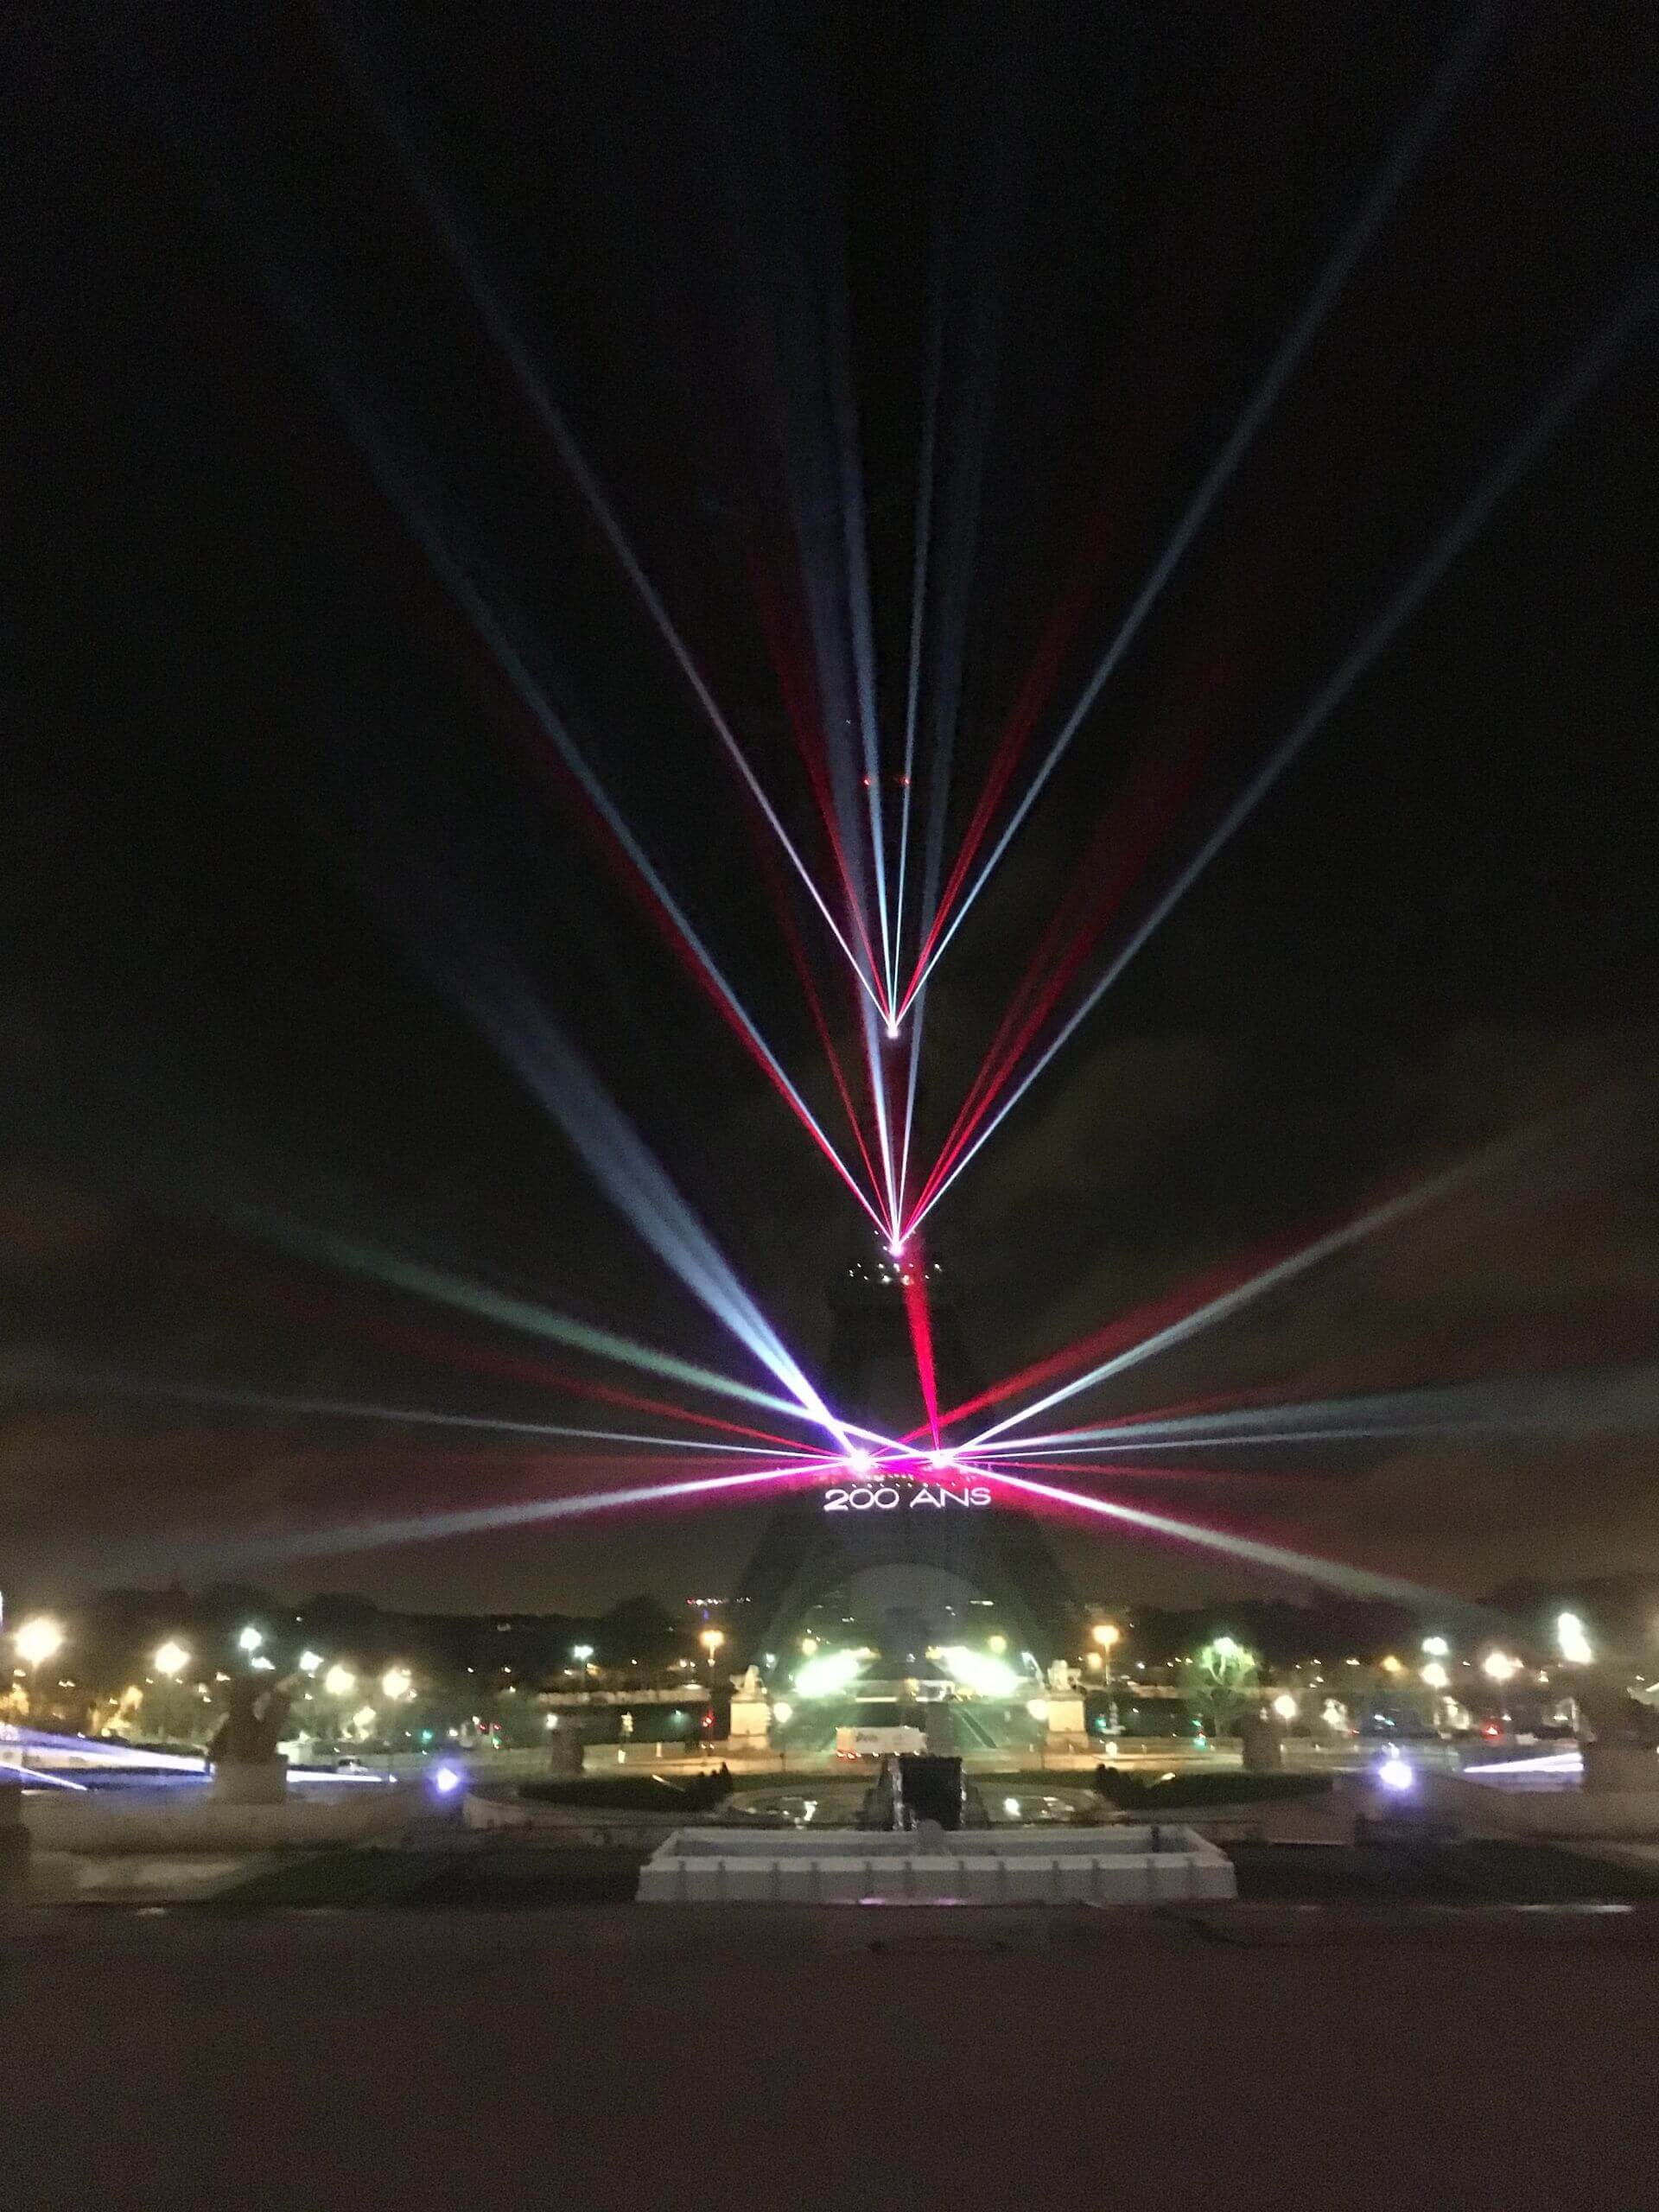 Europe Évènement - Volumetric show - Photo of the Eiffel Tower with 200-year-old writing projected on it and red and white laser beams